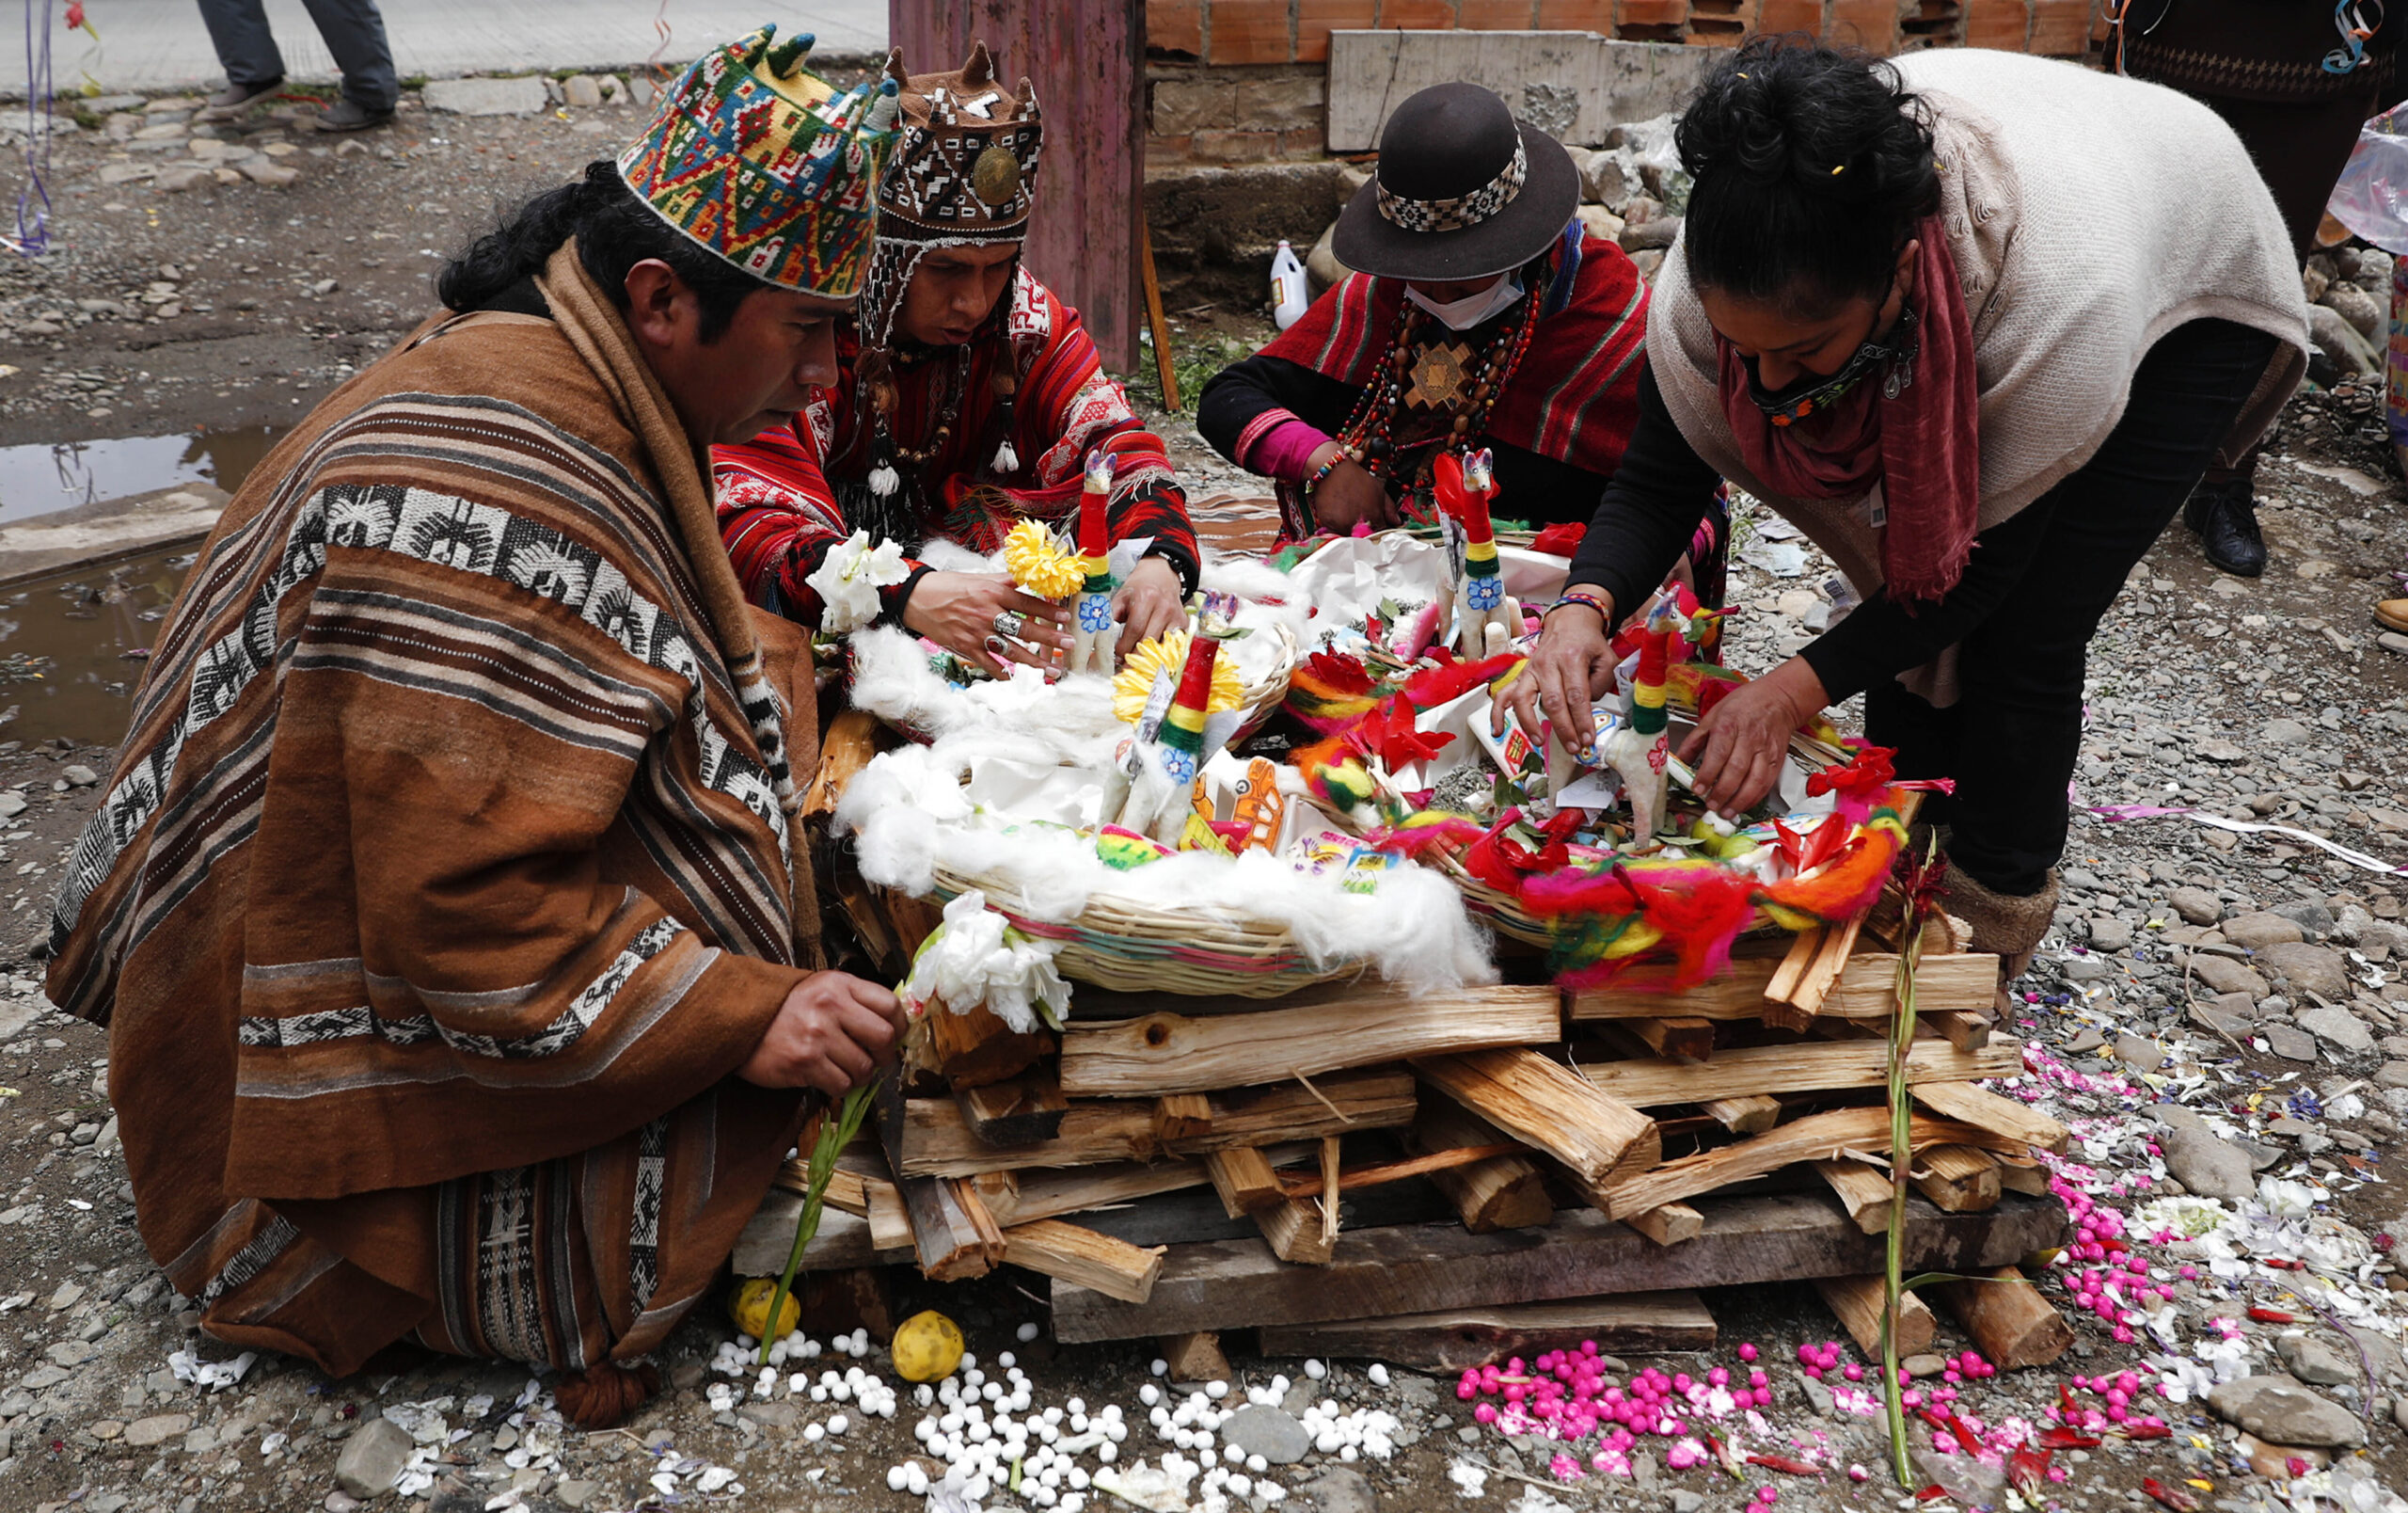 Spiritual guides prepare an offering to burn at a "Martes de Challa,” or Challa Tuesday celebration, in which devotees bury food, throw candies, burn incense, decorate their houses, businesses, cars, all in a show of gratitude to Pachamama or Mother Earth, in La Paz, Bolivia, Tuesday, Feb. 16, 2021. The Andean ritual coincides with the Christian holiday Shrove Tuesday, culminating with Carnival festivities to prepare for the Lenten season which begins Ash Wednesday, the following day. (AP Photo/Juan Karita)